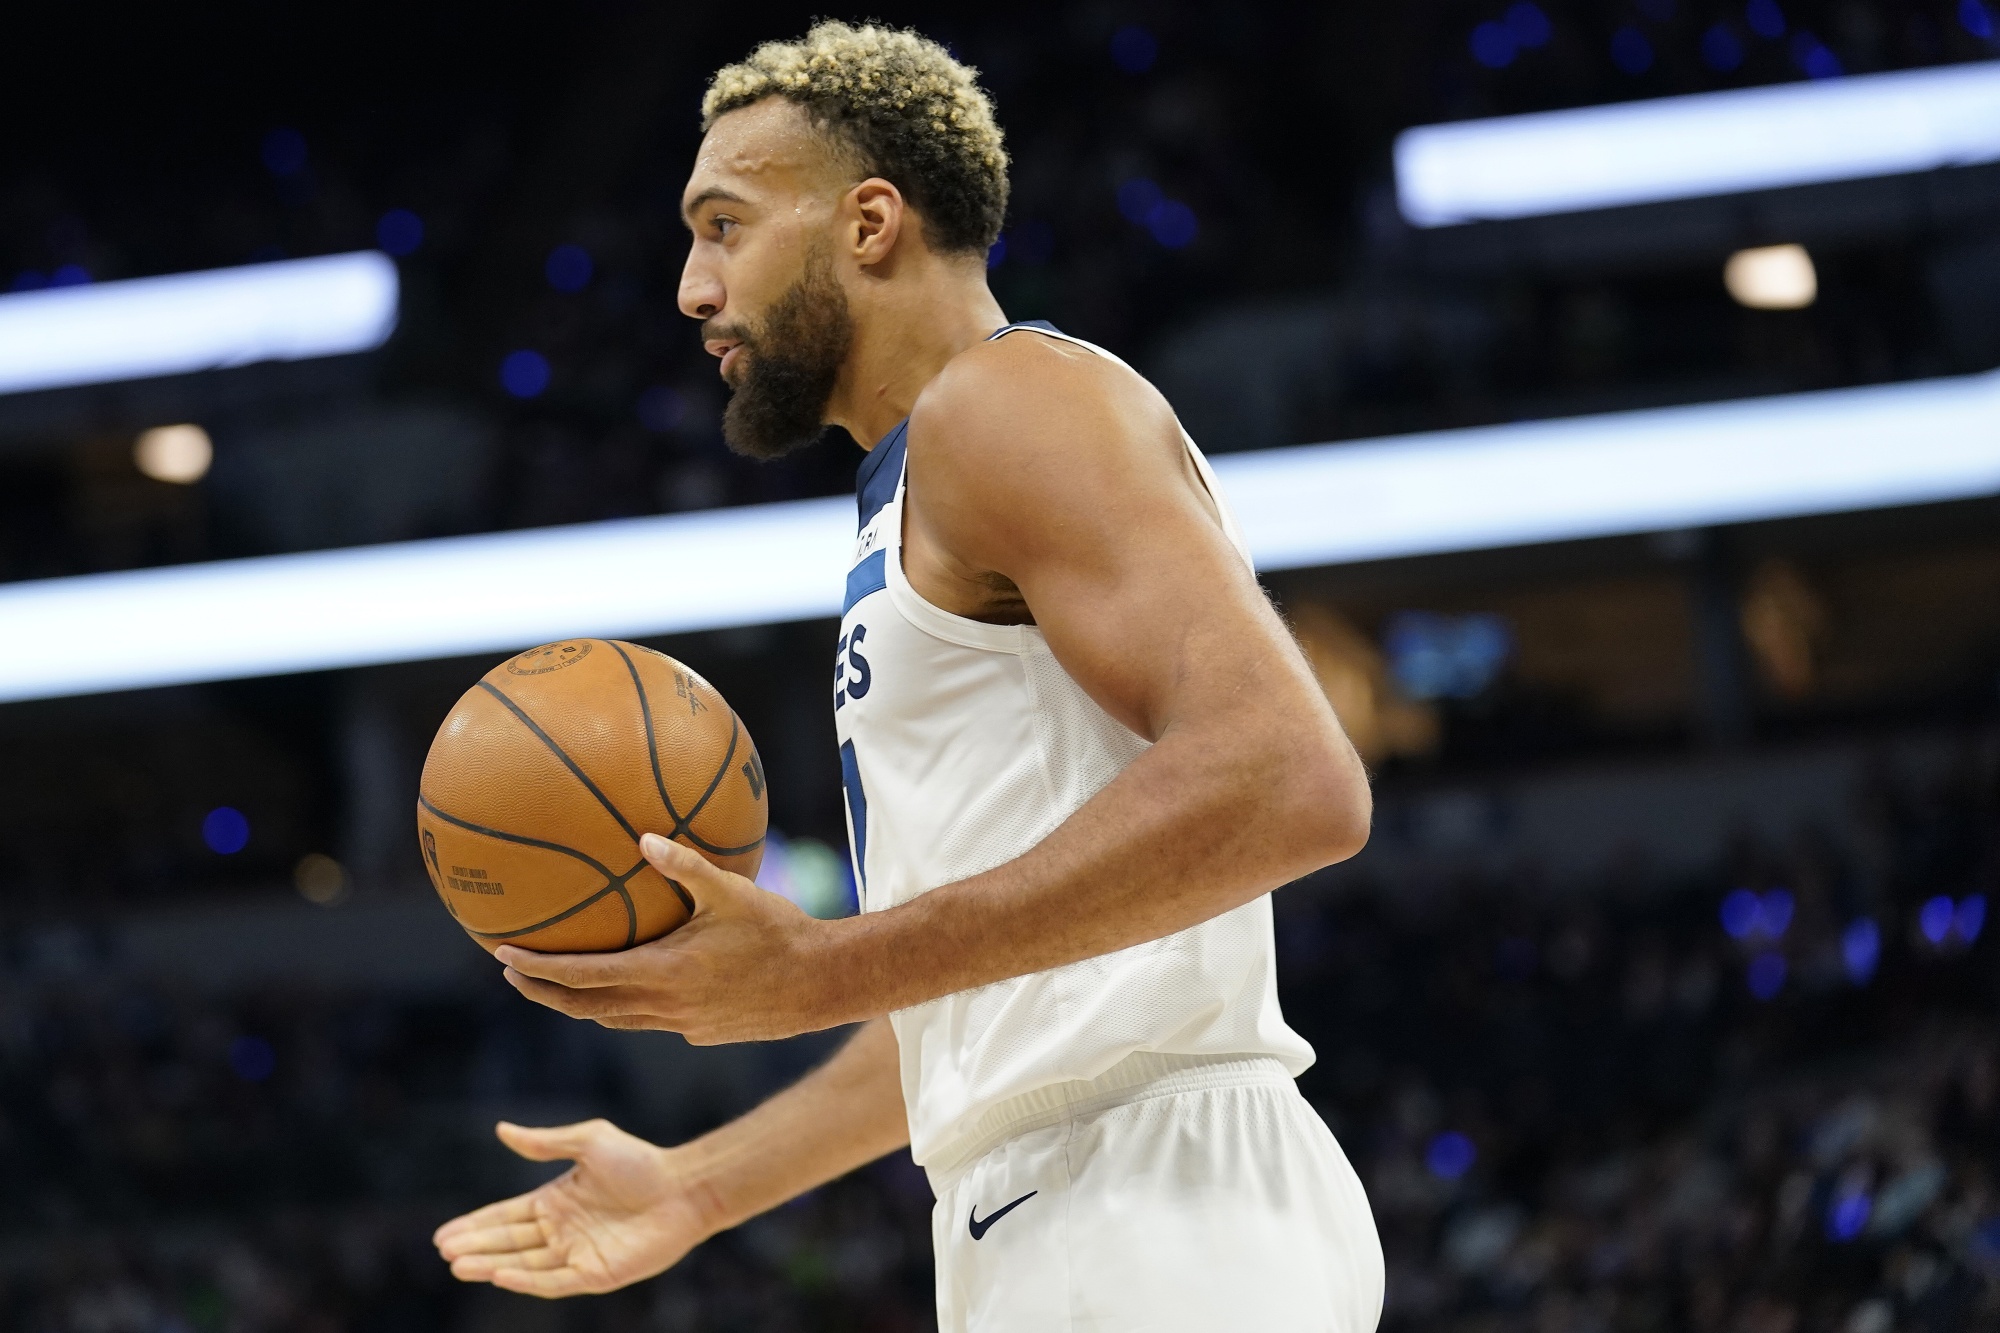 Gobert Thrives in T-wolves Debut to Lead 115-108 Win Vs. OKC